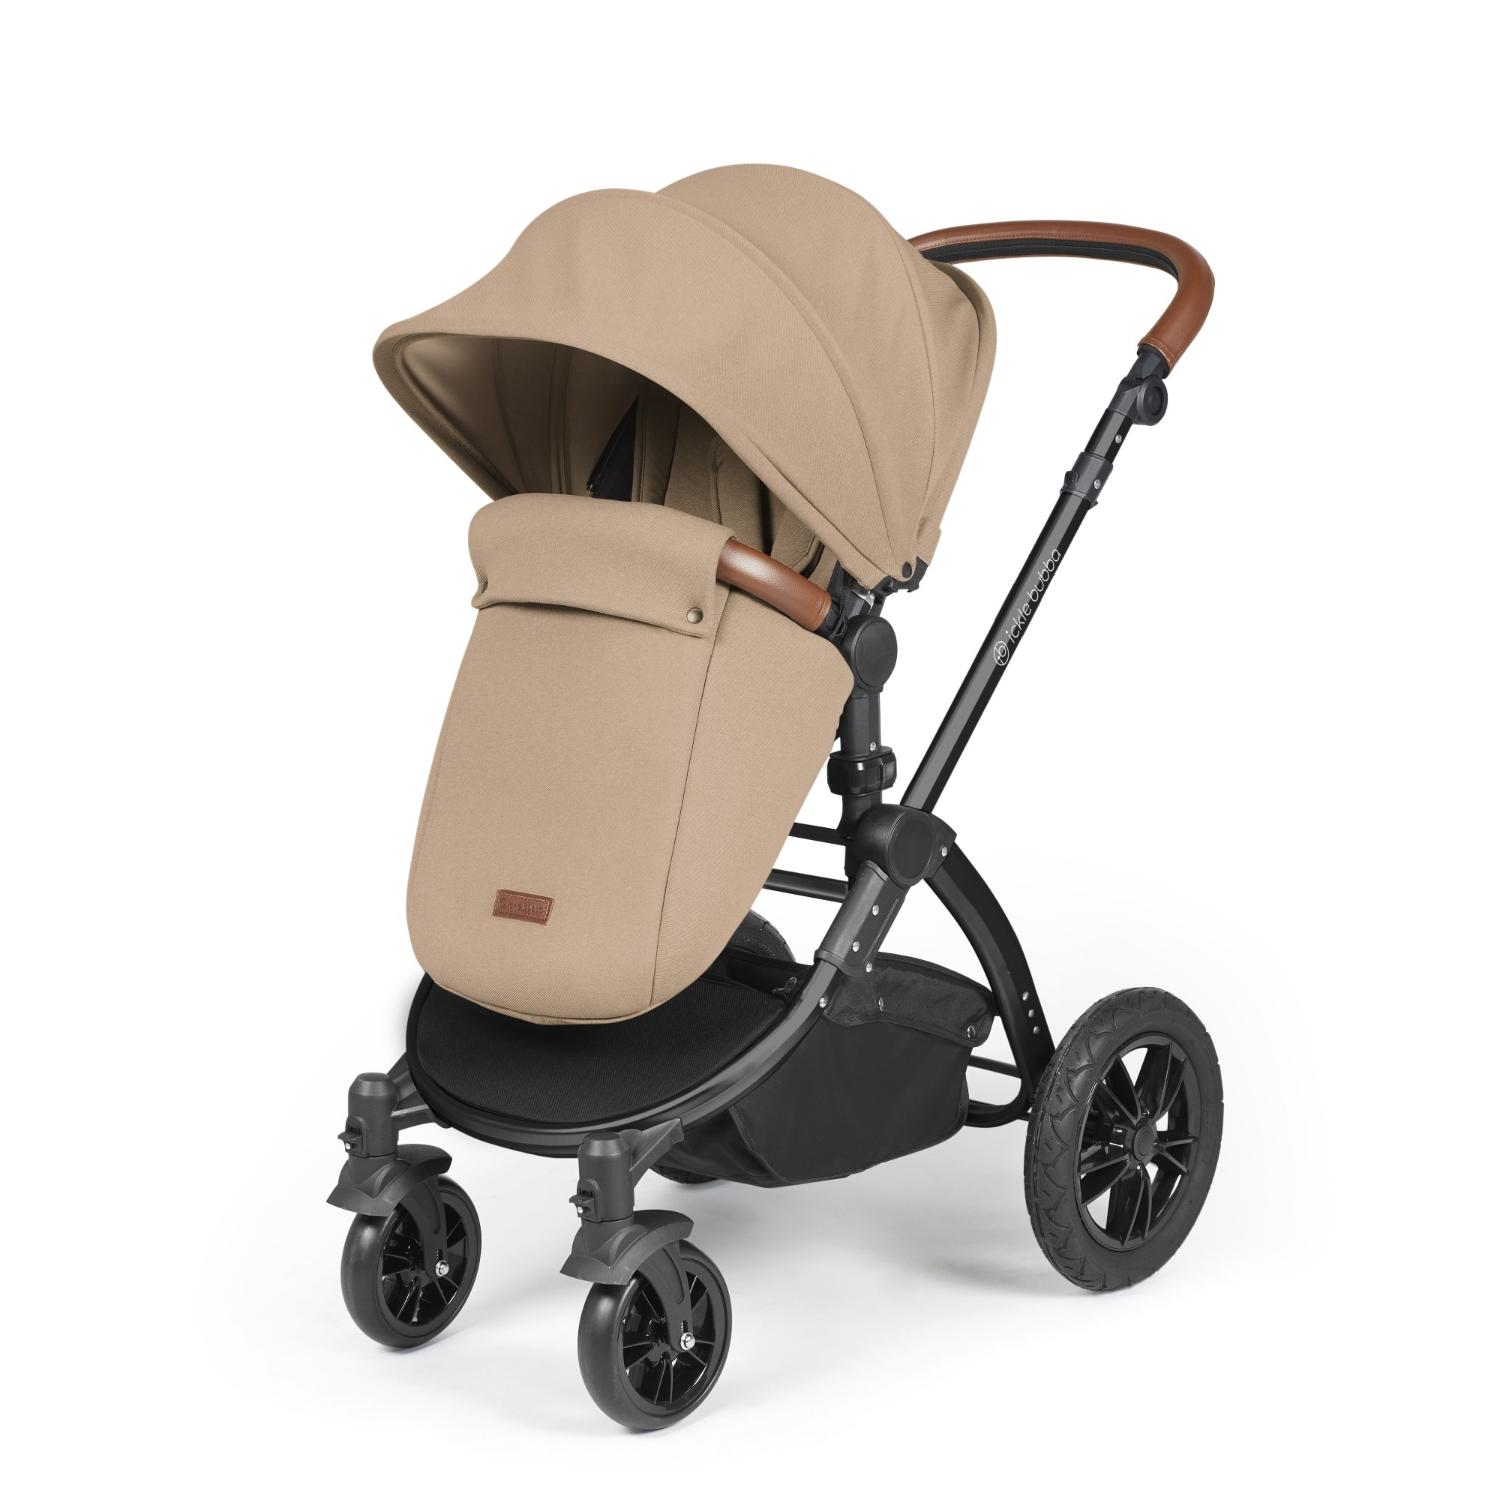 Ickle Bubba Stomp Luxe Pushchair with foot warmer attached in Desert beige colour with tan handle